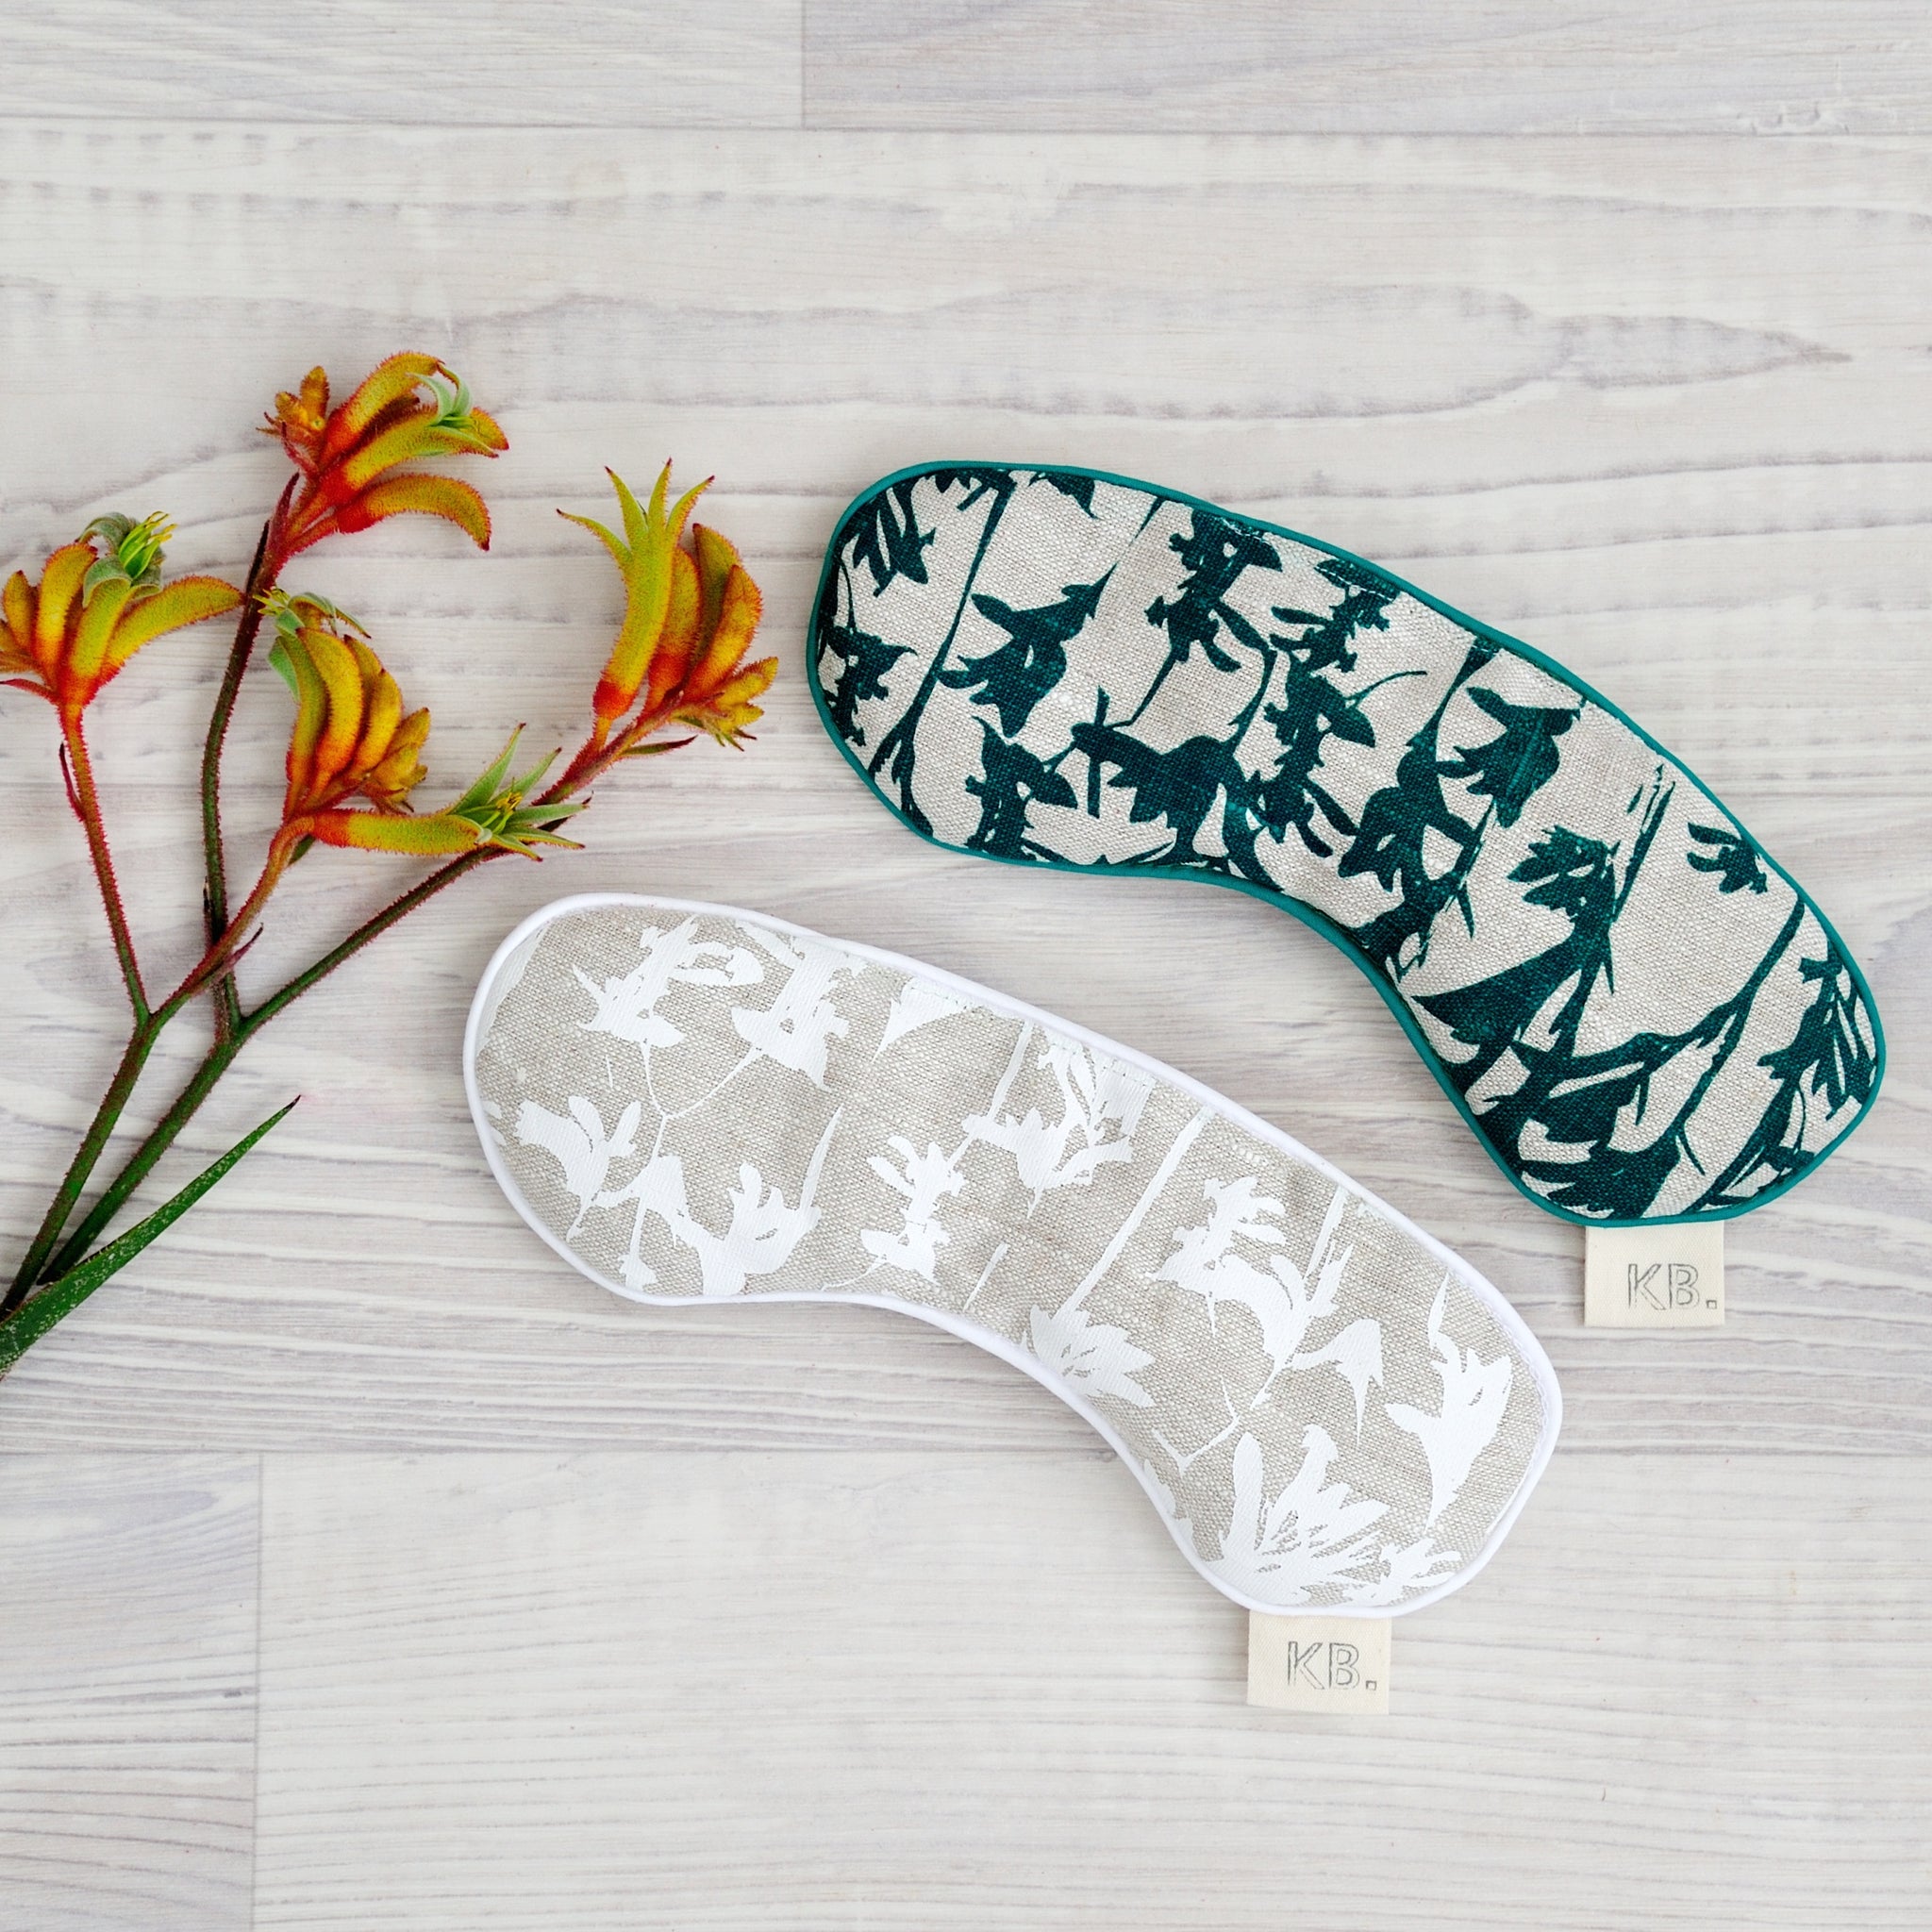 100% linen hand screen printed kangaroo paw eye pillows for stress relief by Krystol Brailey Designs